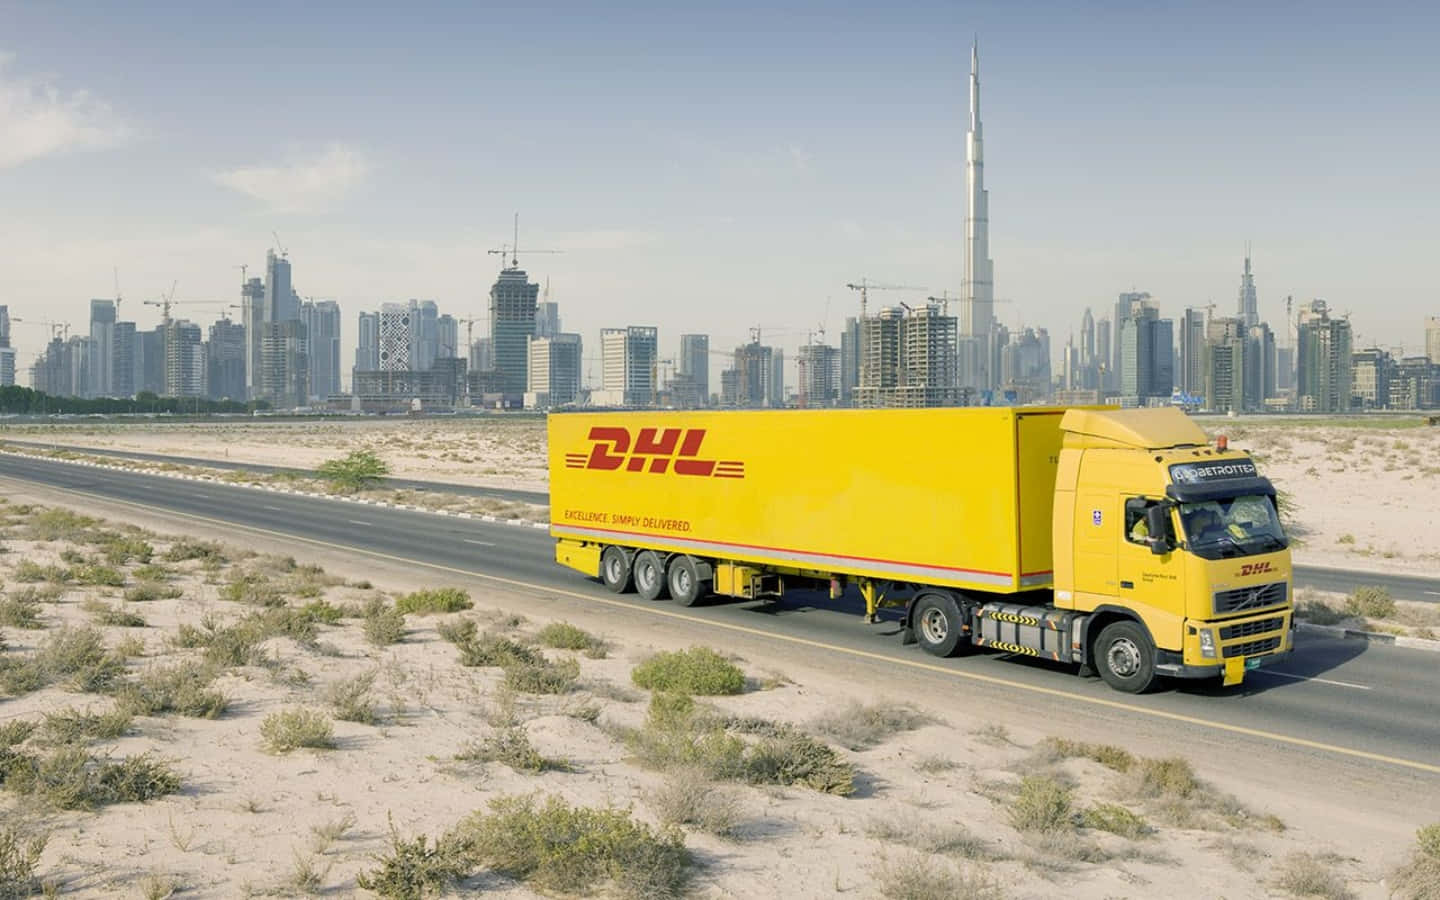 Dhl Truck Driving Down The Road With A City In The Background